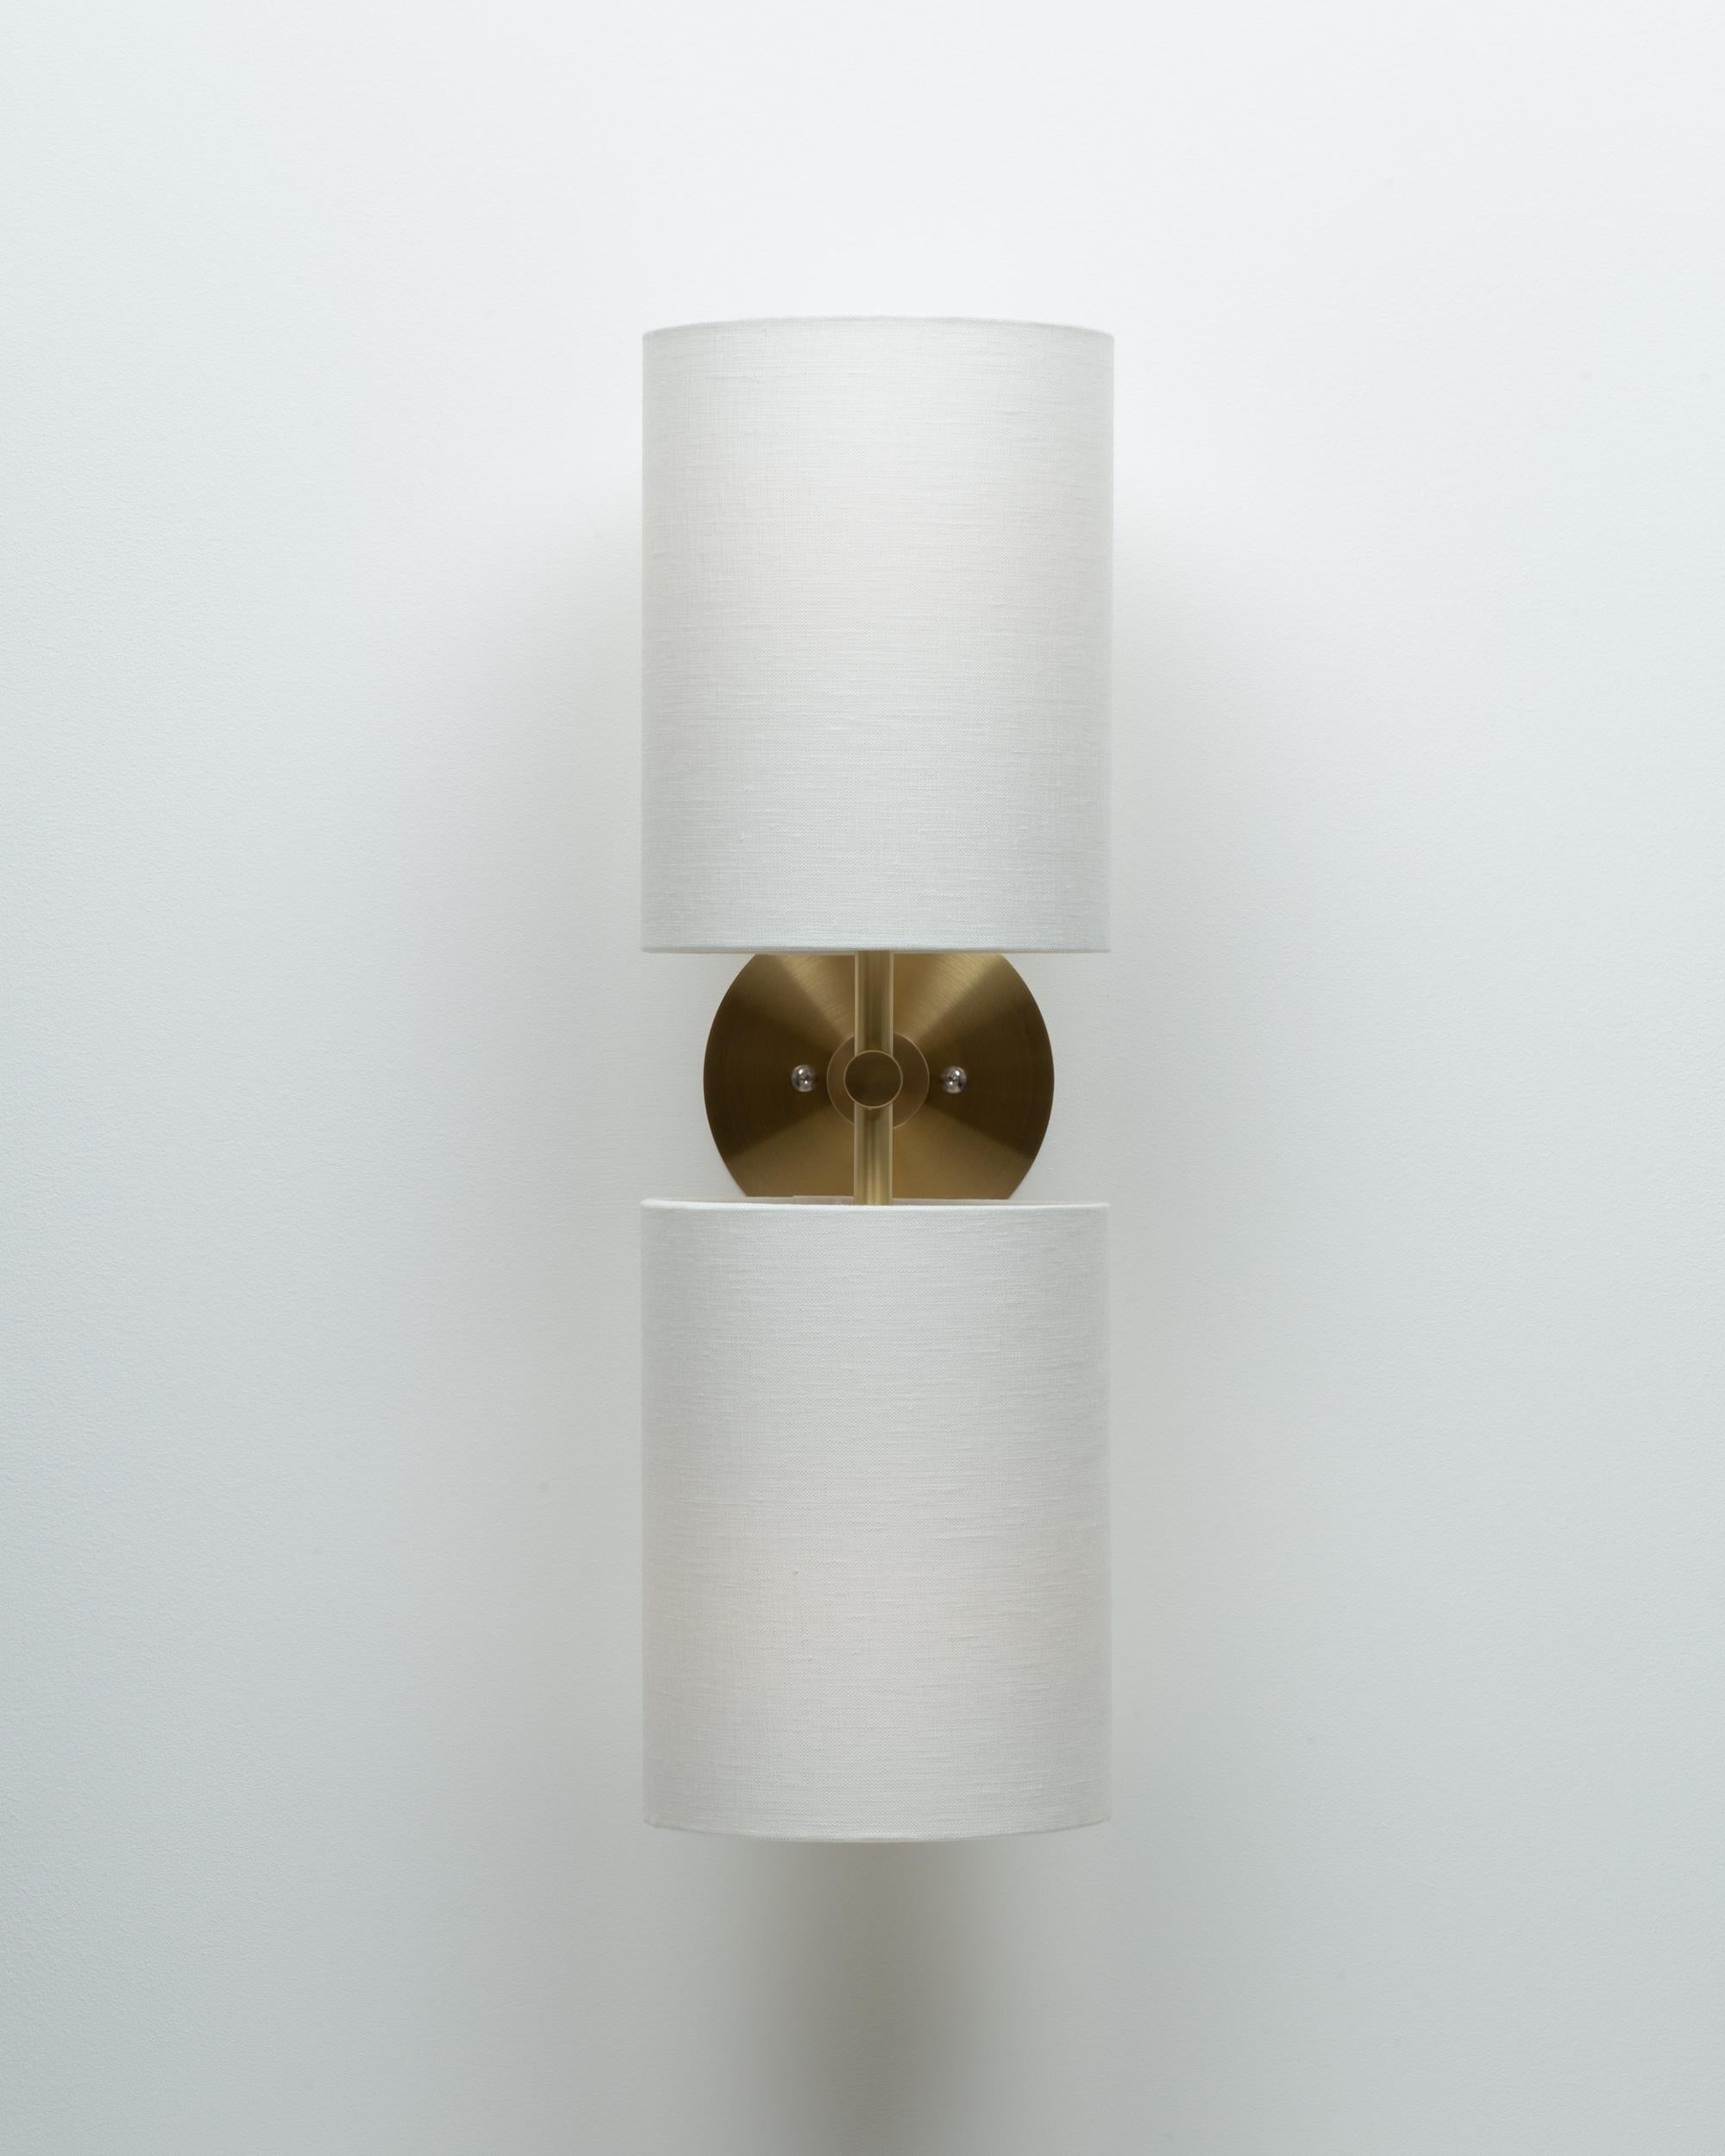 Double Linen Shade Wall Light 
Brushed Brass wall plate
2000K - 2800K  95CRI
1200 Dim to Warm Lumens 
Hard Wired
Sphere III Bulbs Included
Custom Linen Shade Colours available on request. 
Handmade in Hackney Wick, London.